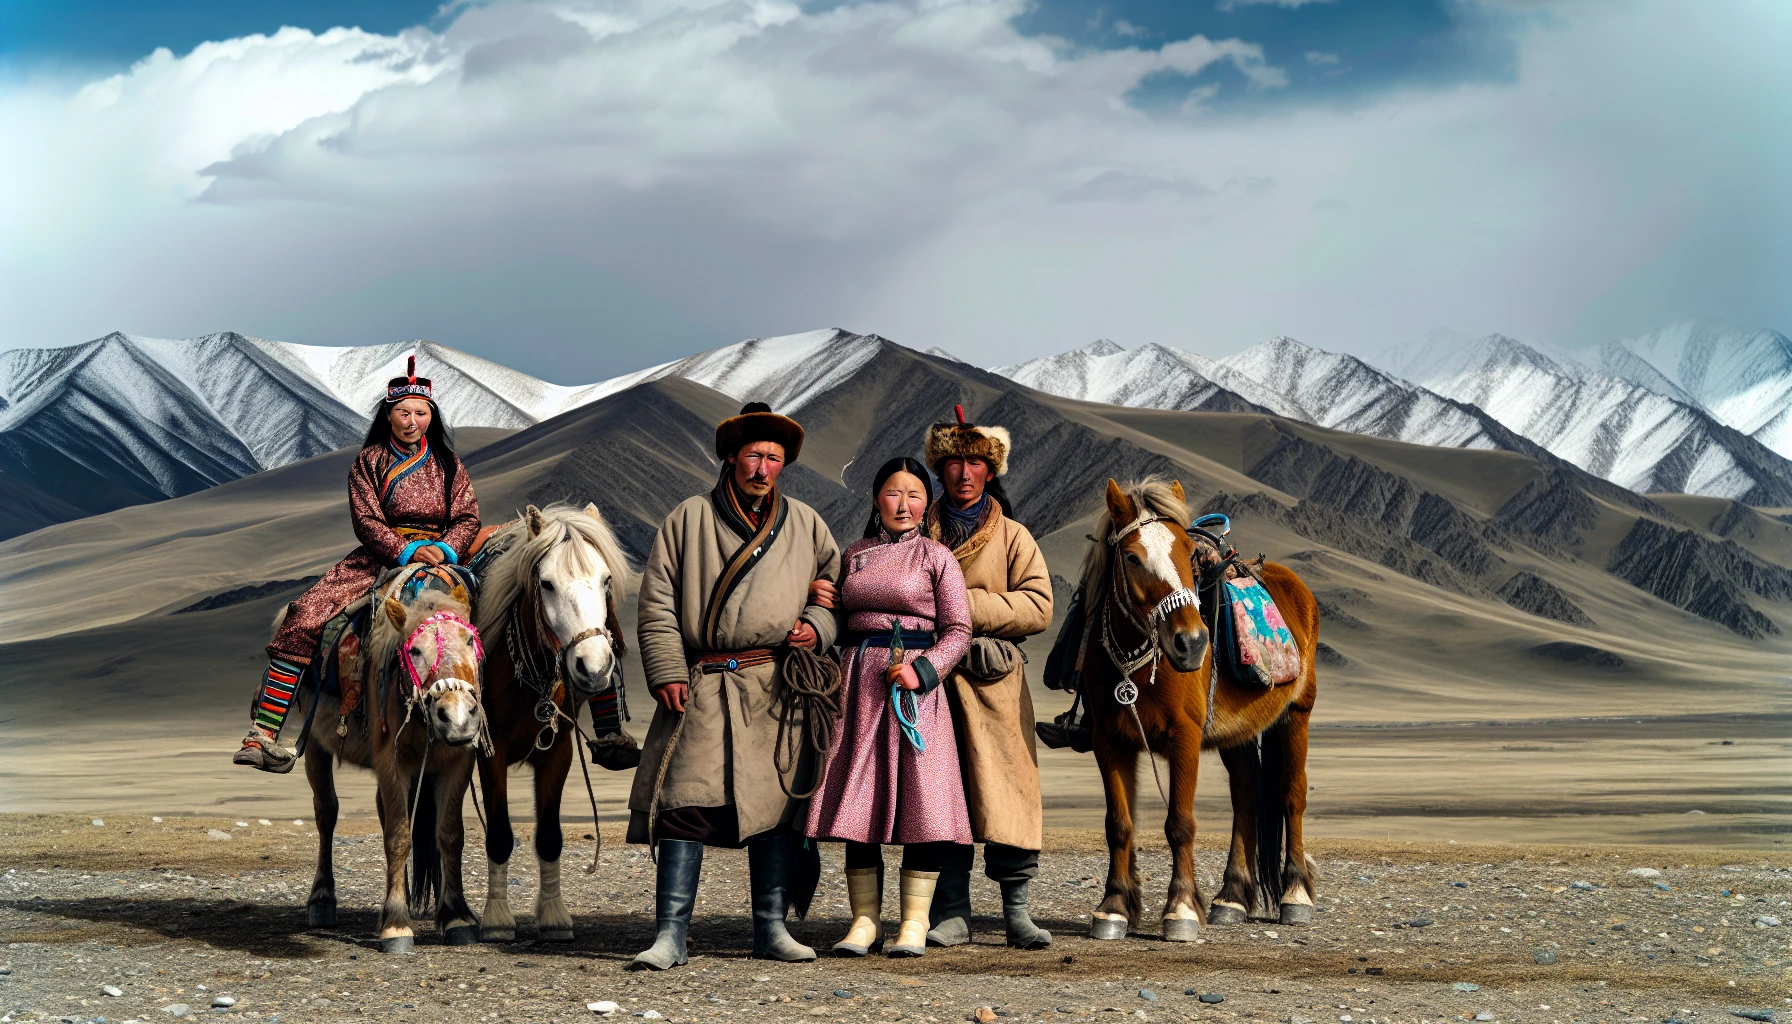 Nomadic family with horses in the Altai landscape